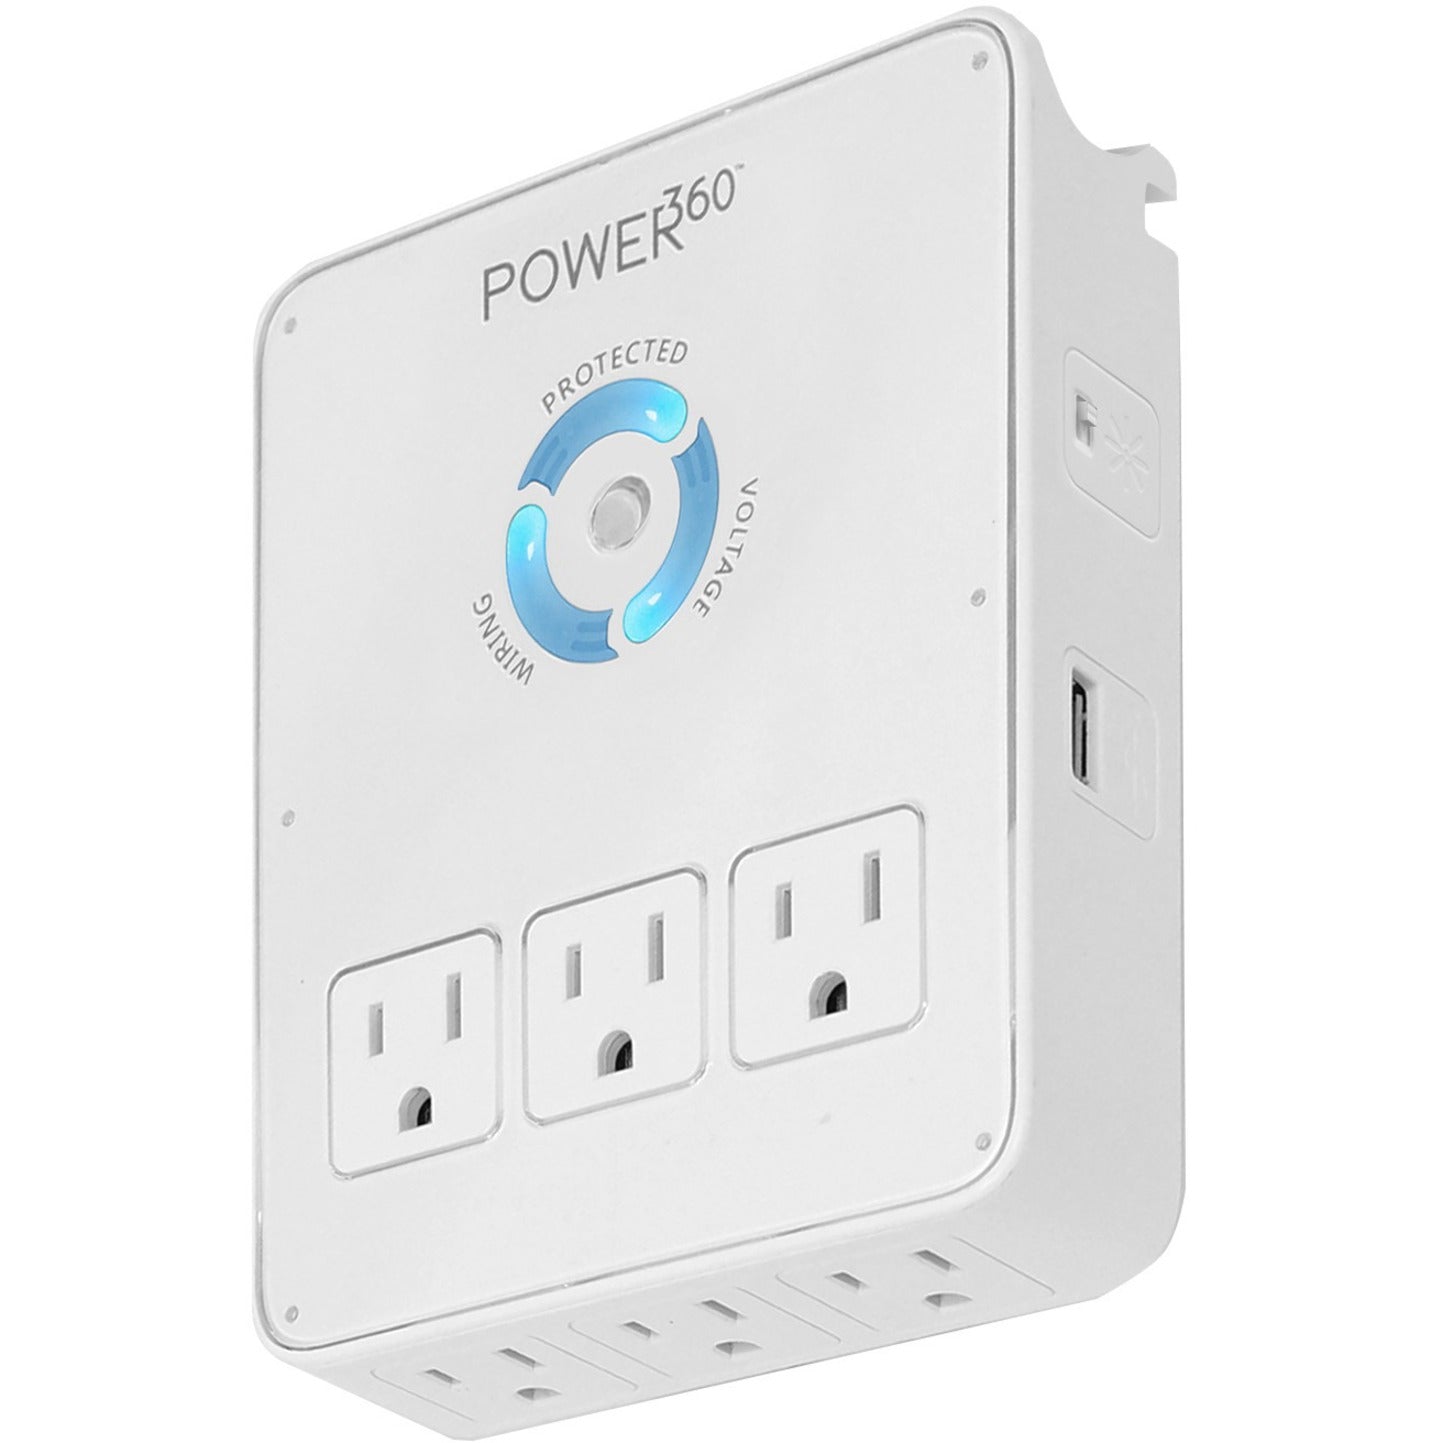 Panamax P360-DOCK Power360 6-Outlets Surge Suppressor/Protector, 1080J, USB Charging